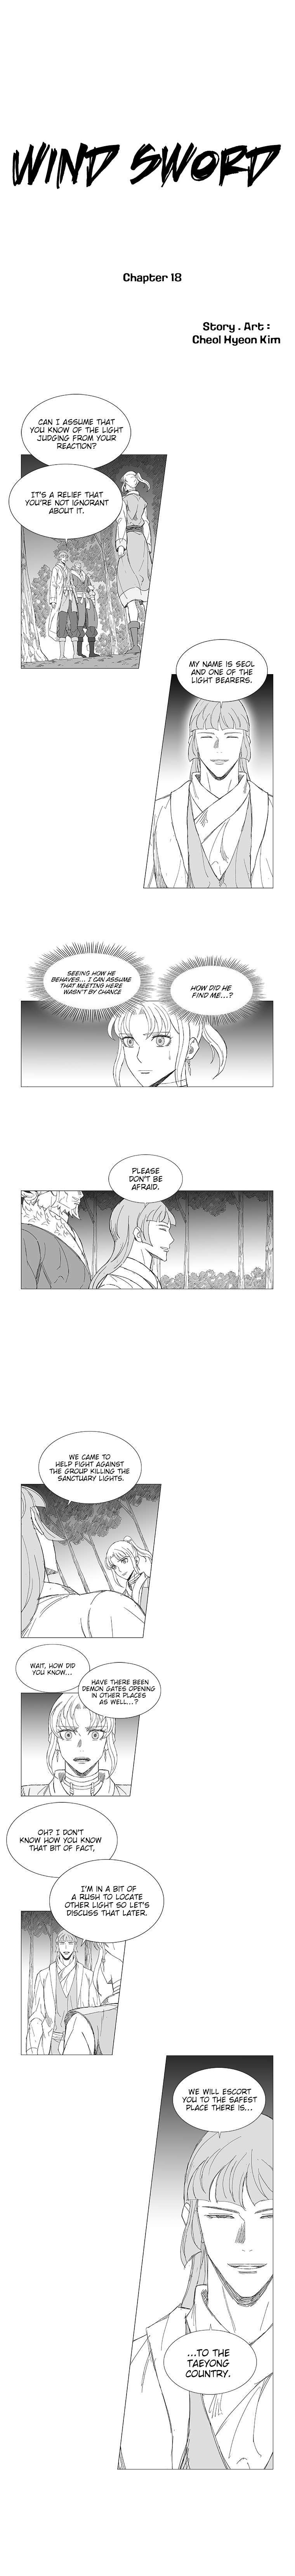 Wind Sword Chapter 18 Page 1